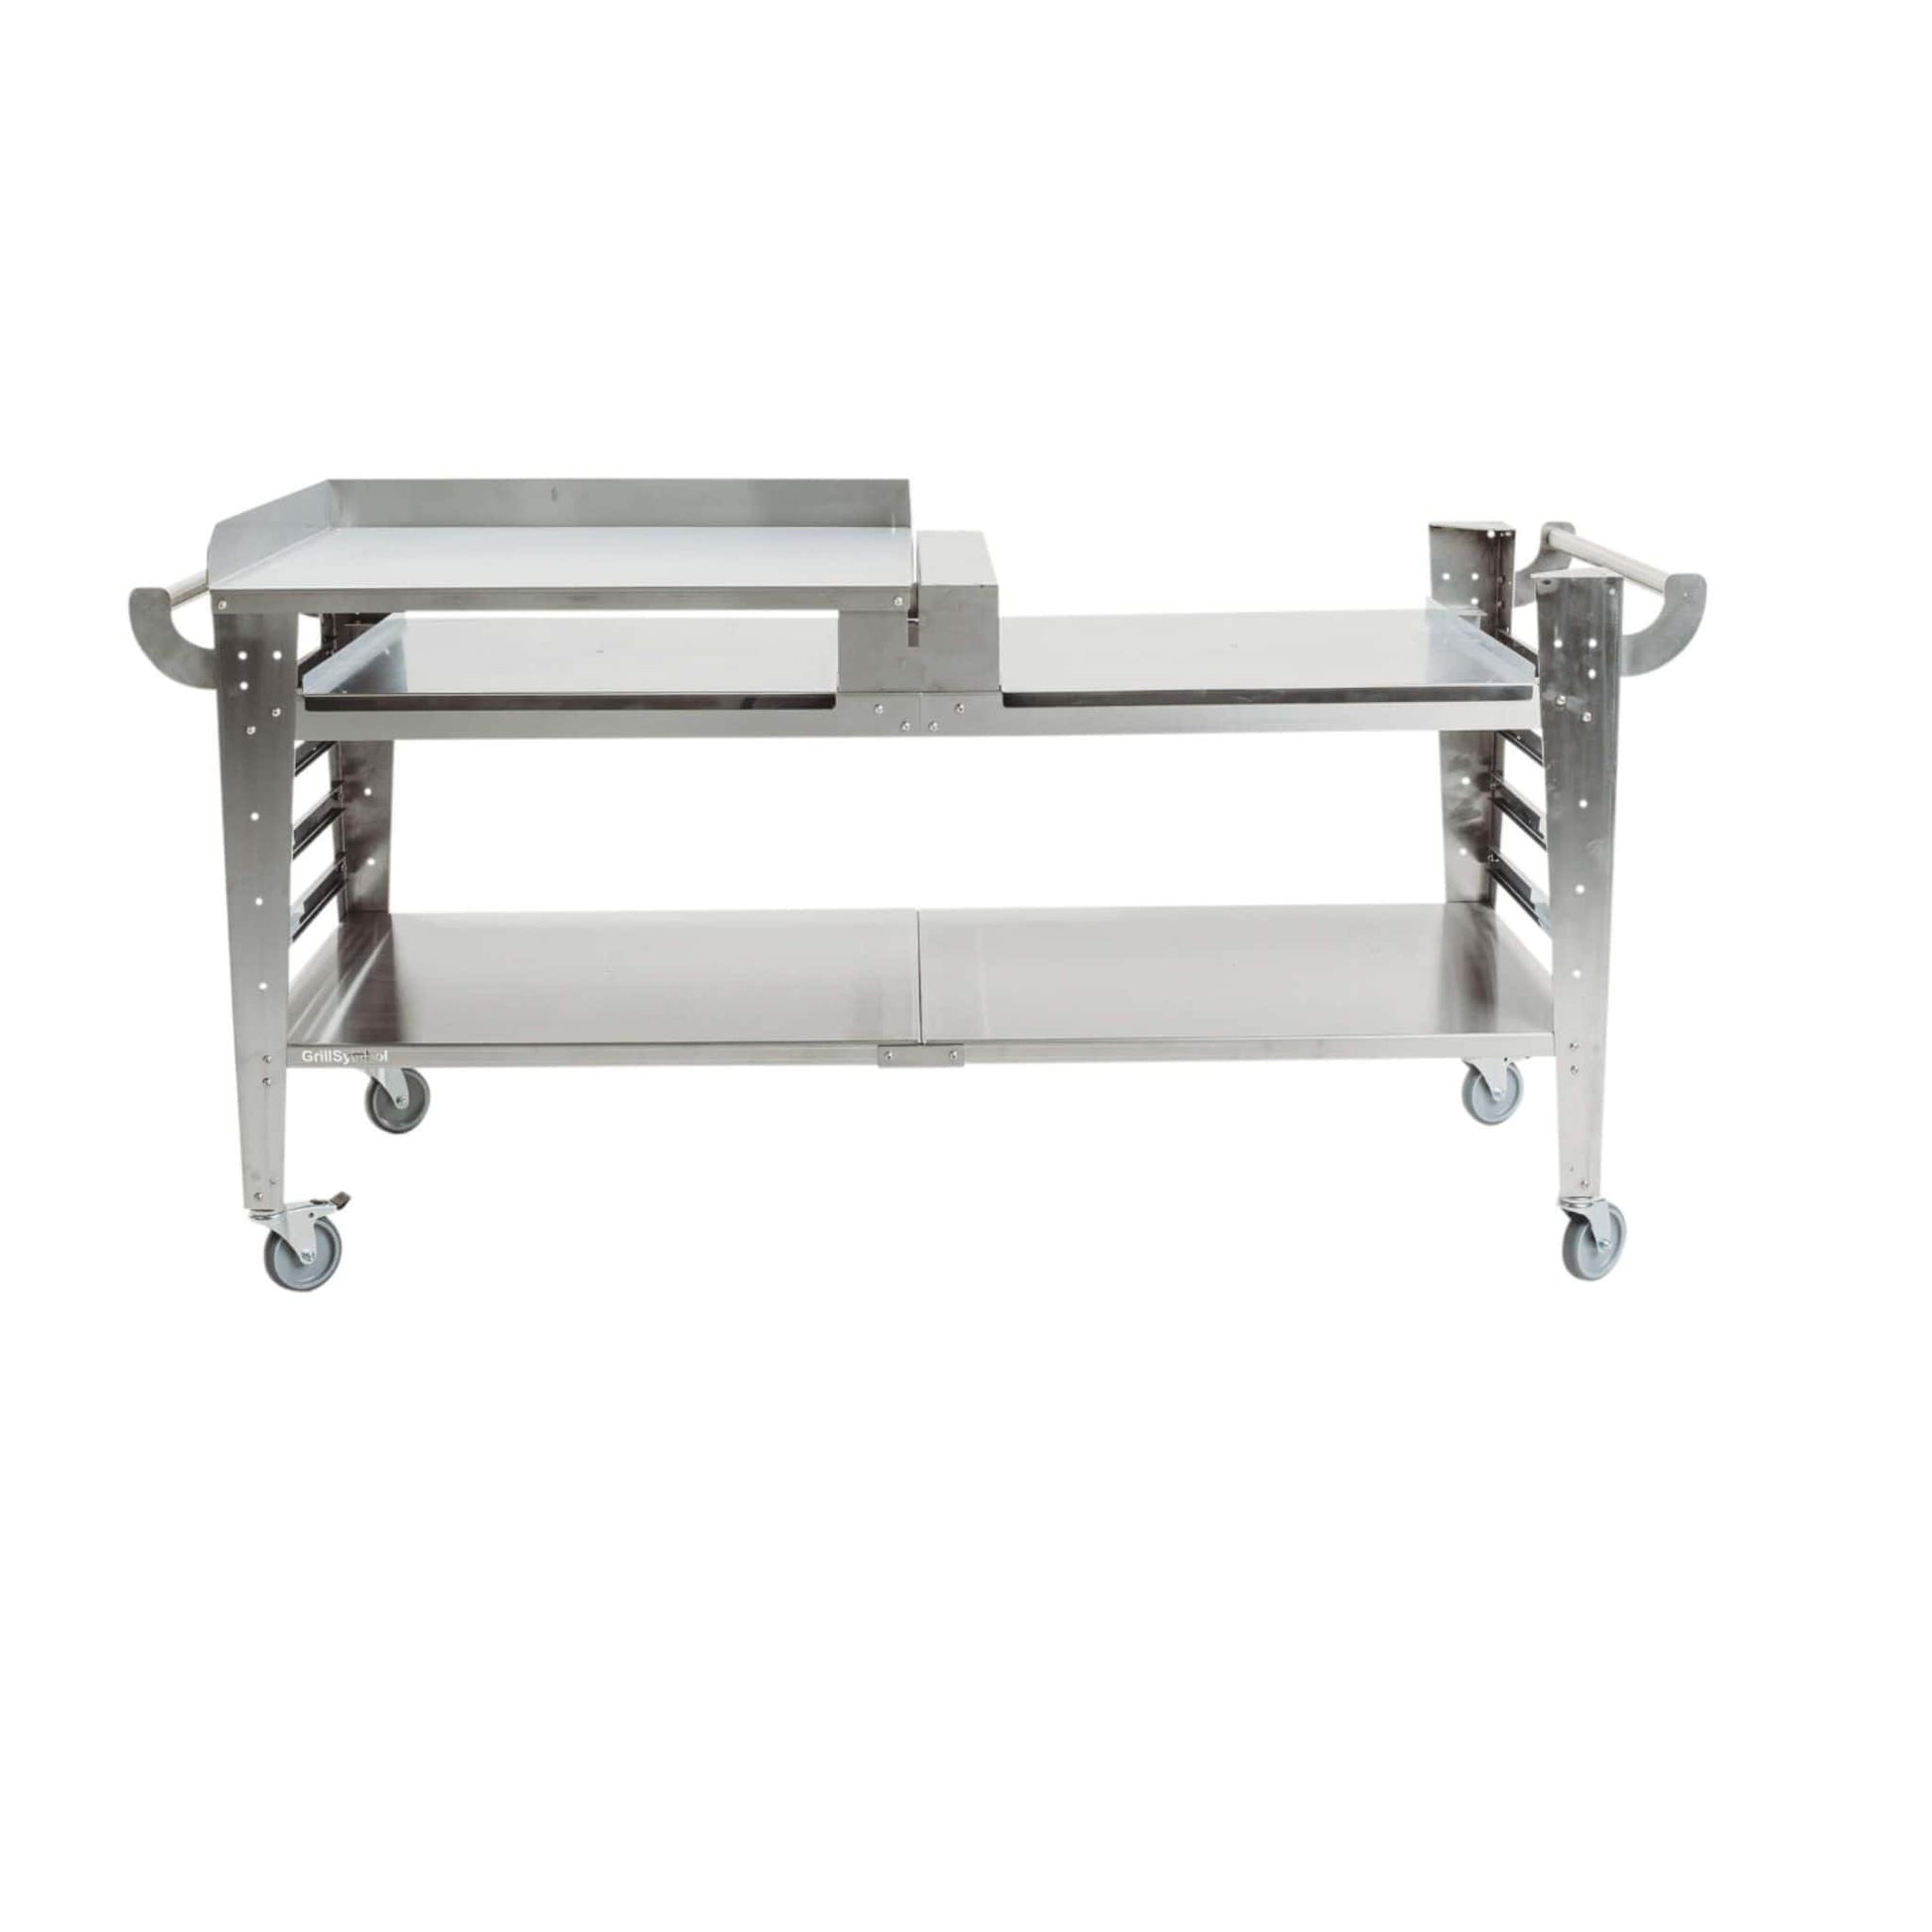 GrillSymbol stainless steel Side Table for Pizza Oven Baso-inox-XL